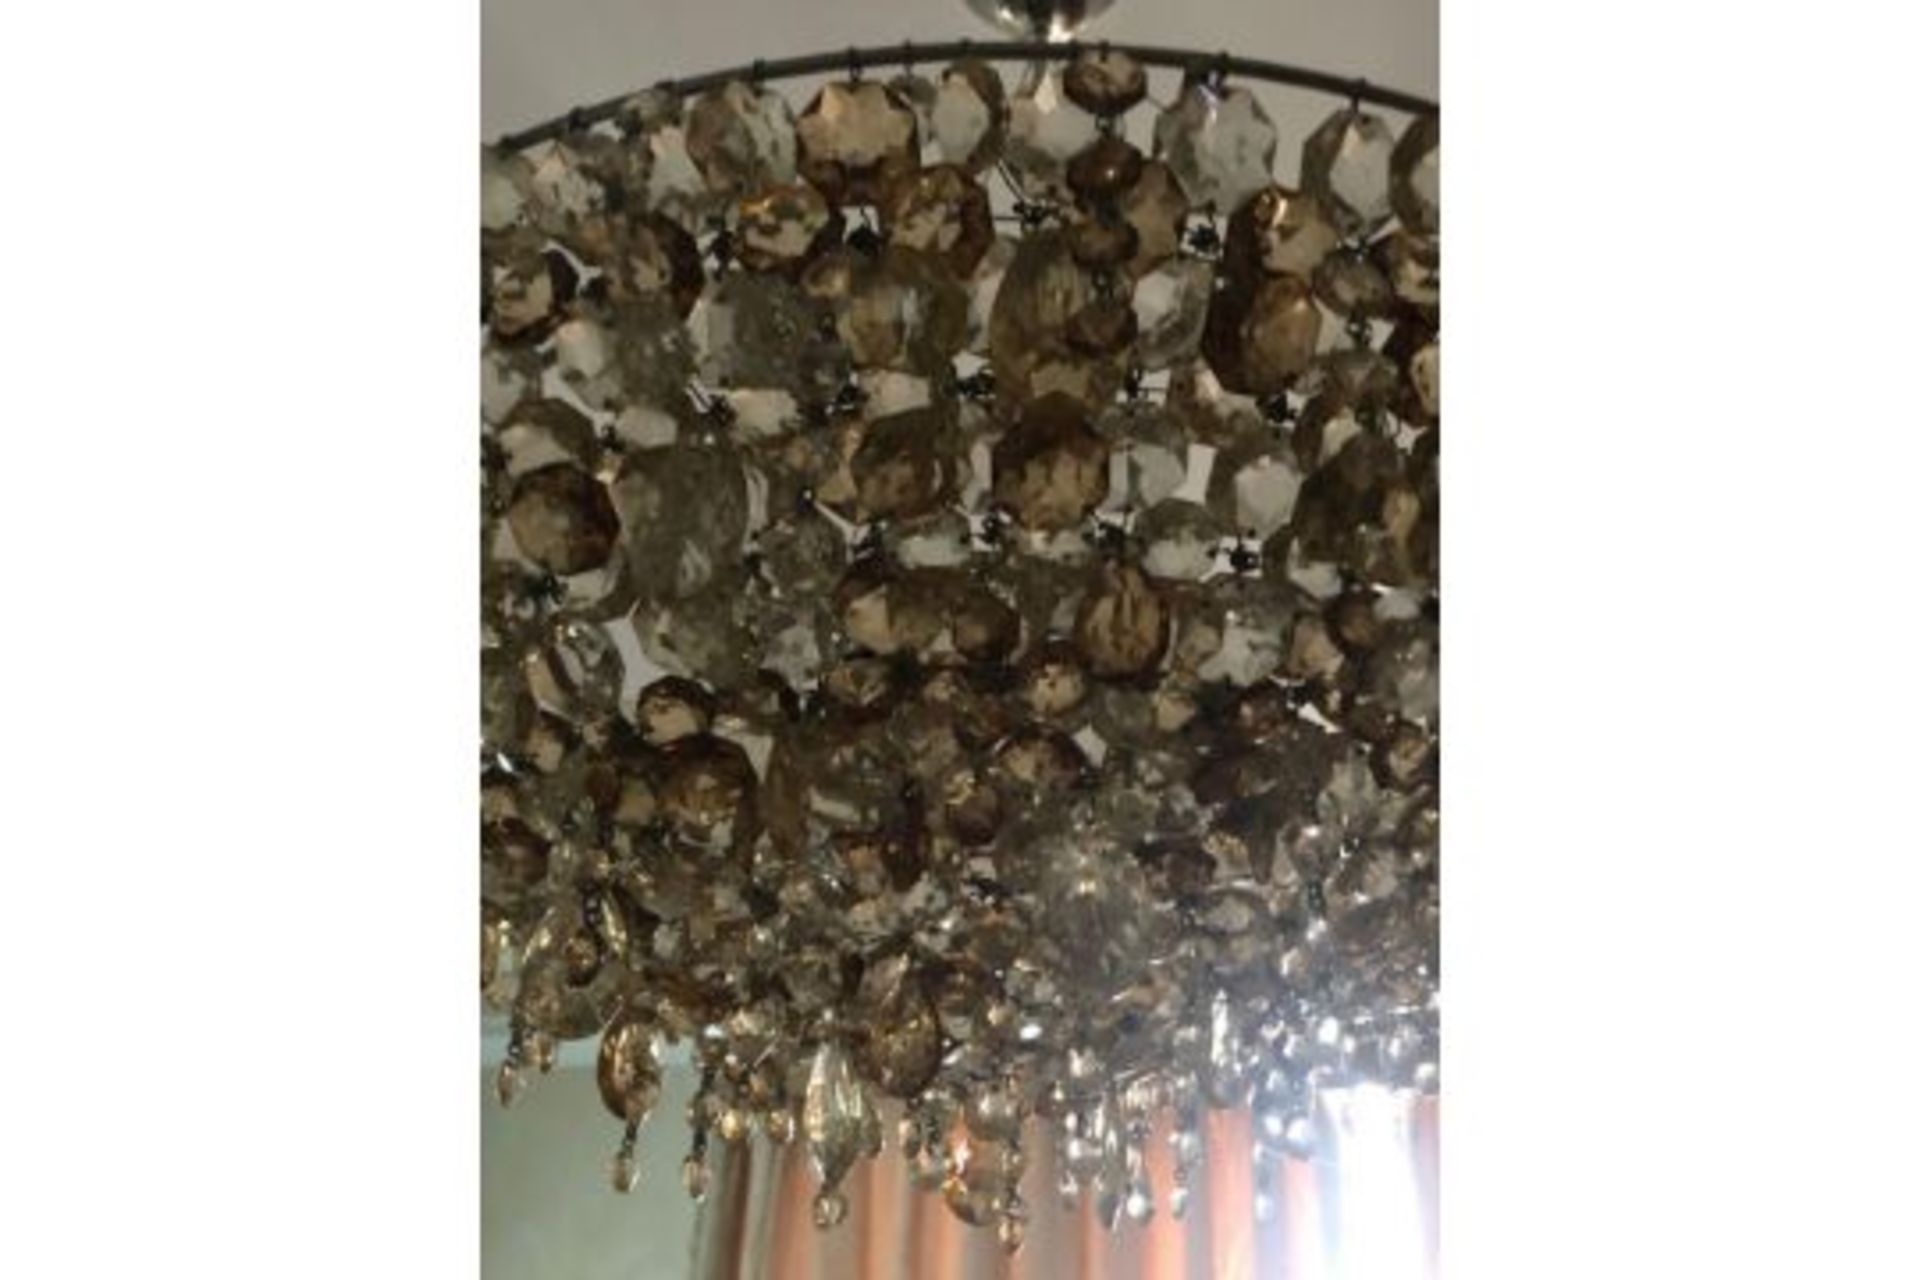 Lolli E Memmoli Ugolino Chandelier Crystals Woven Together Like Fabric, Hung From A Two- - Image 2 of 2